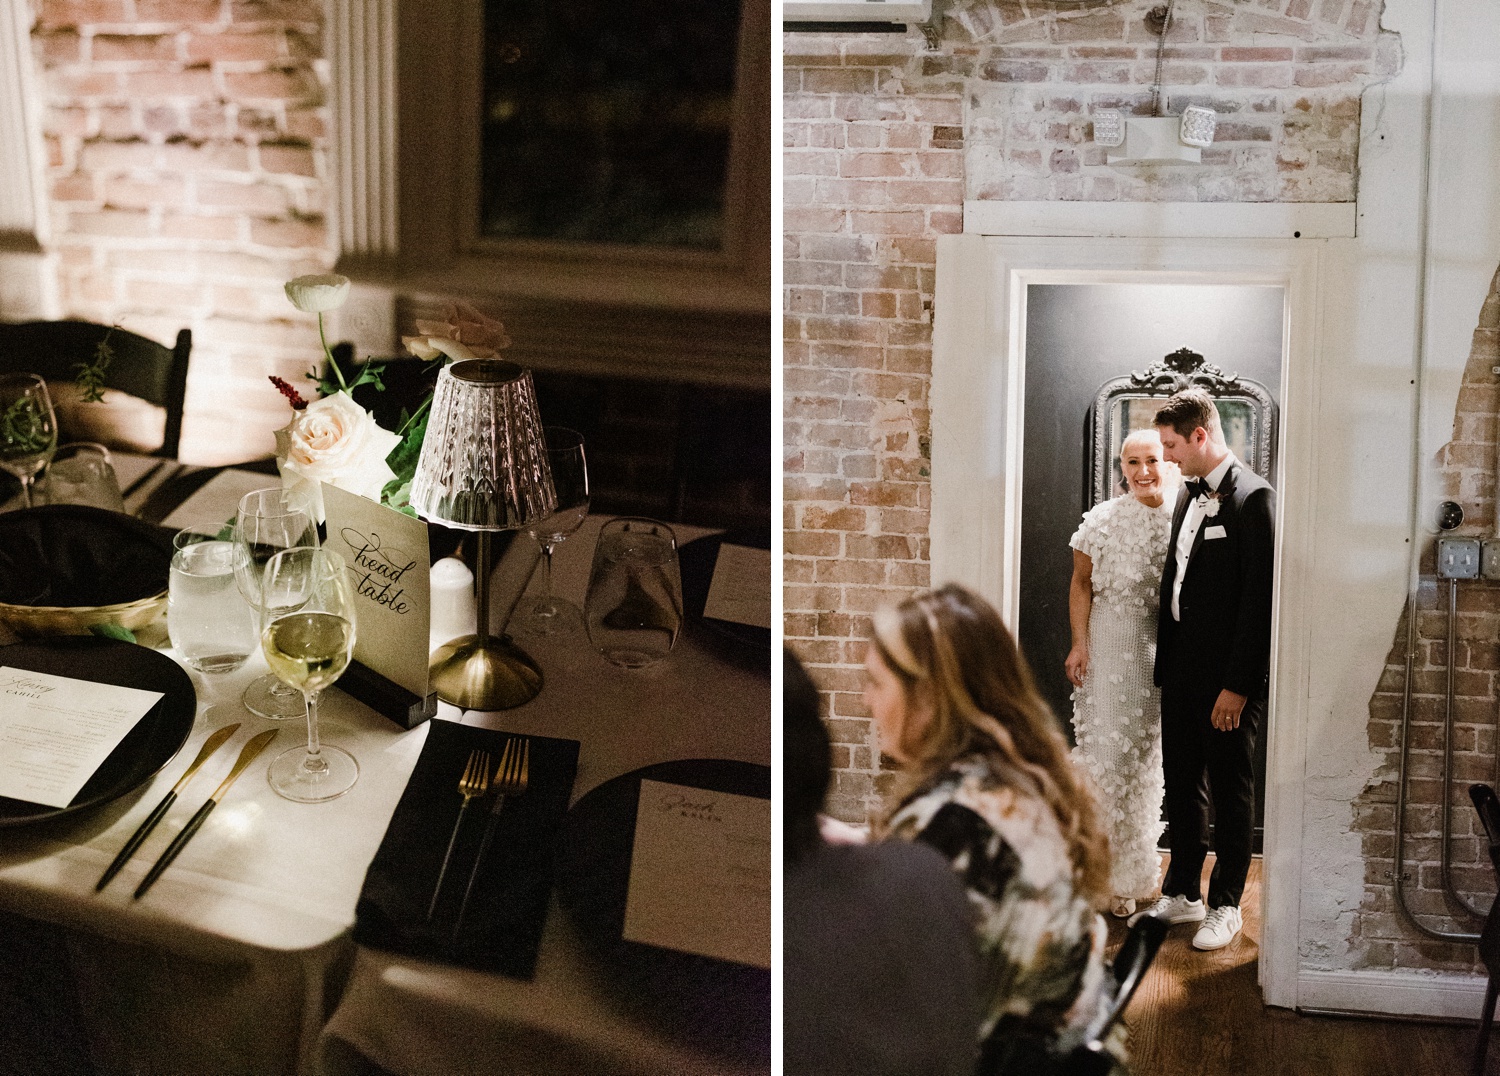 Winter wedding reception with black linens, gold cutlery, and vintage table lamps